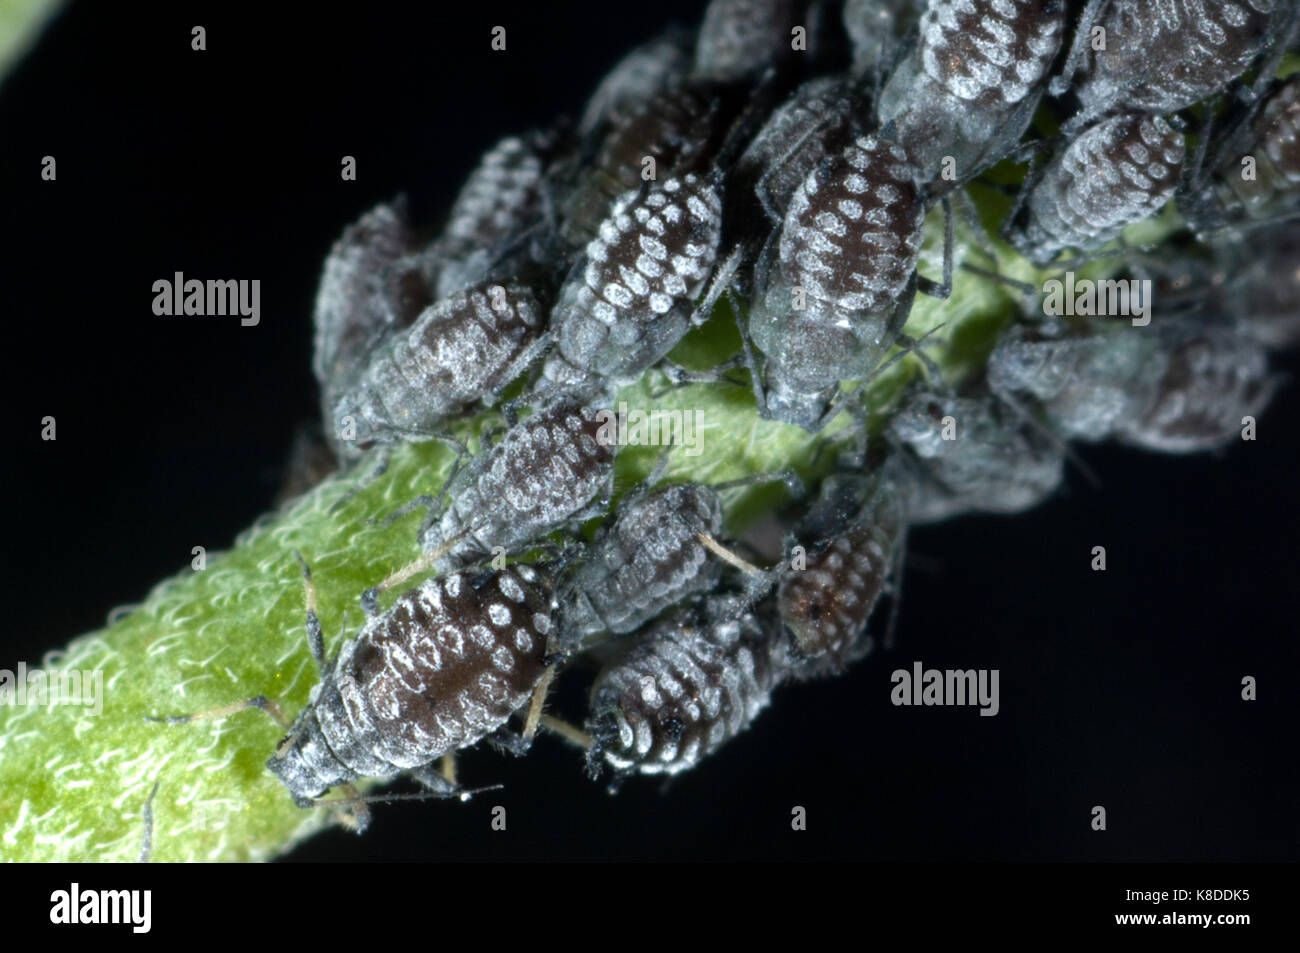 Colony of waxy willowherb aphids, Aphis epilobiaria, on a weed species, broad-leaved willowherb, Epilobium montanum Stock Photo